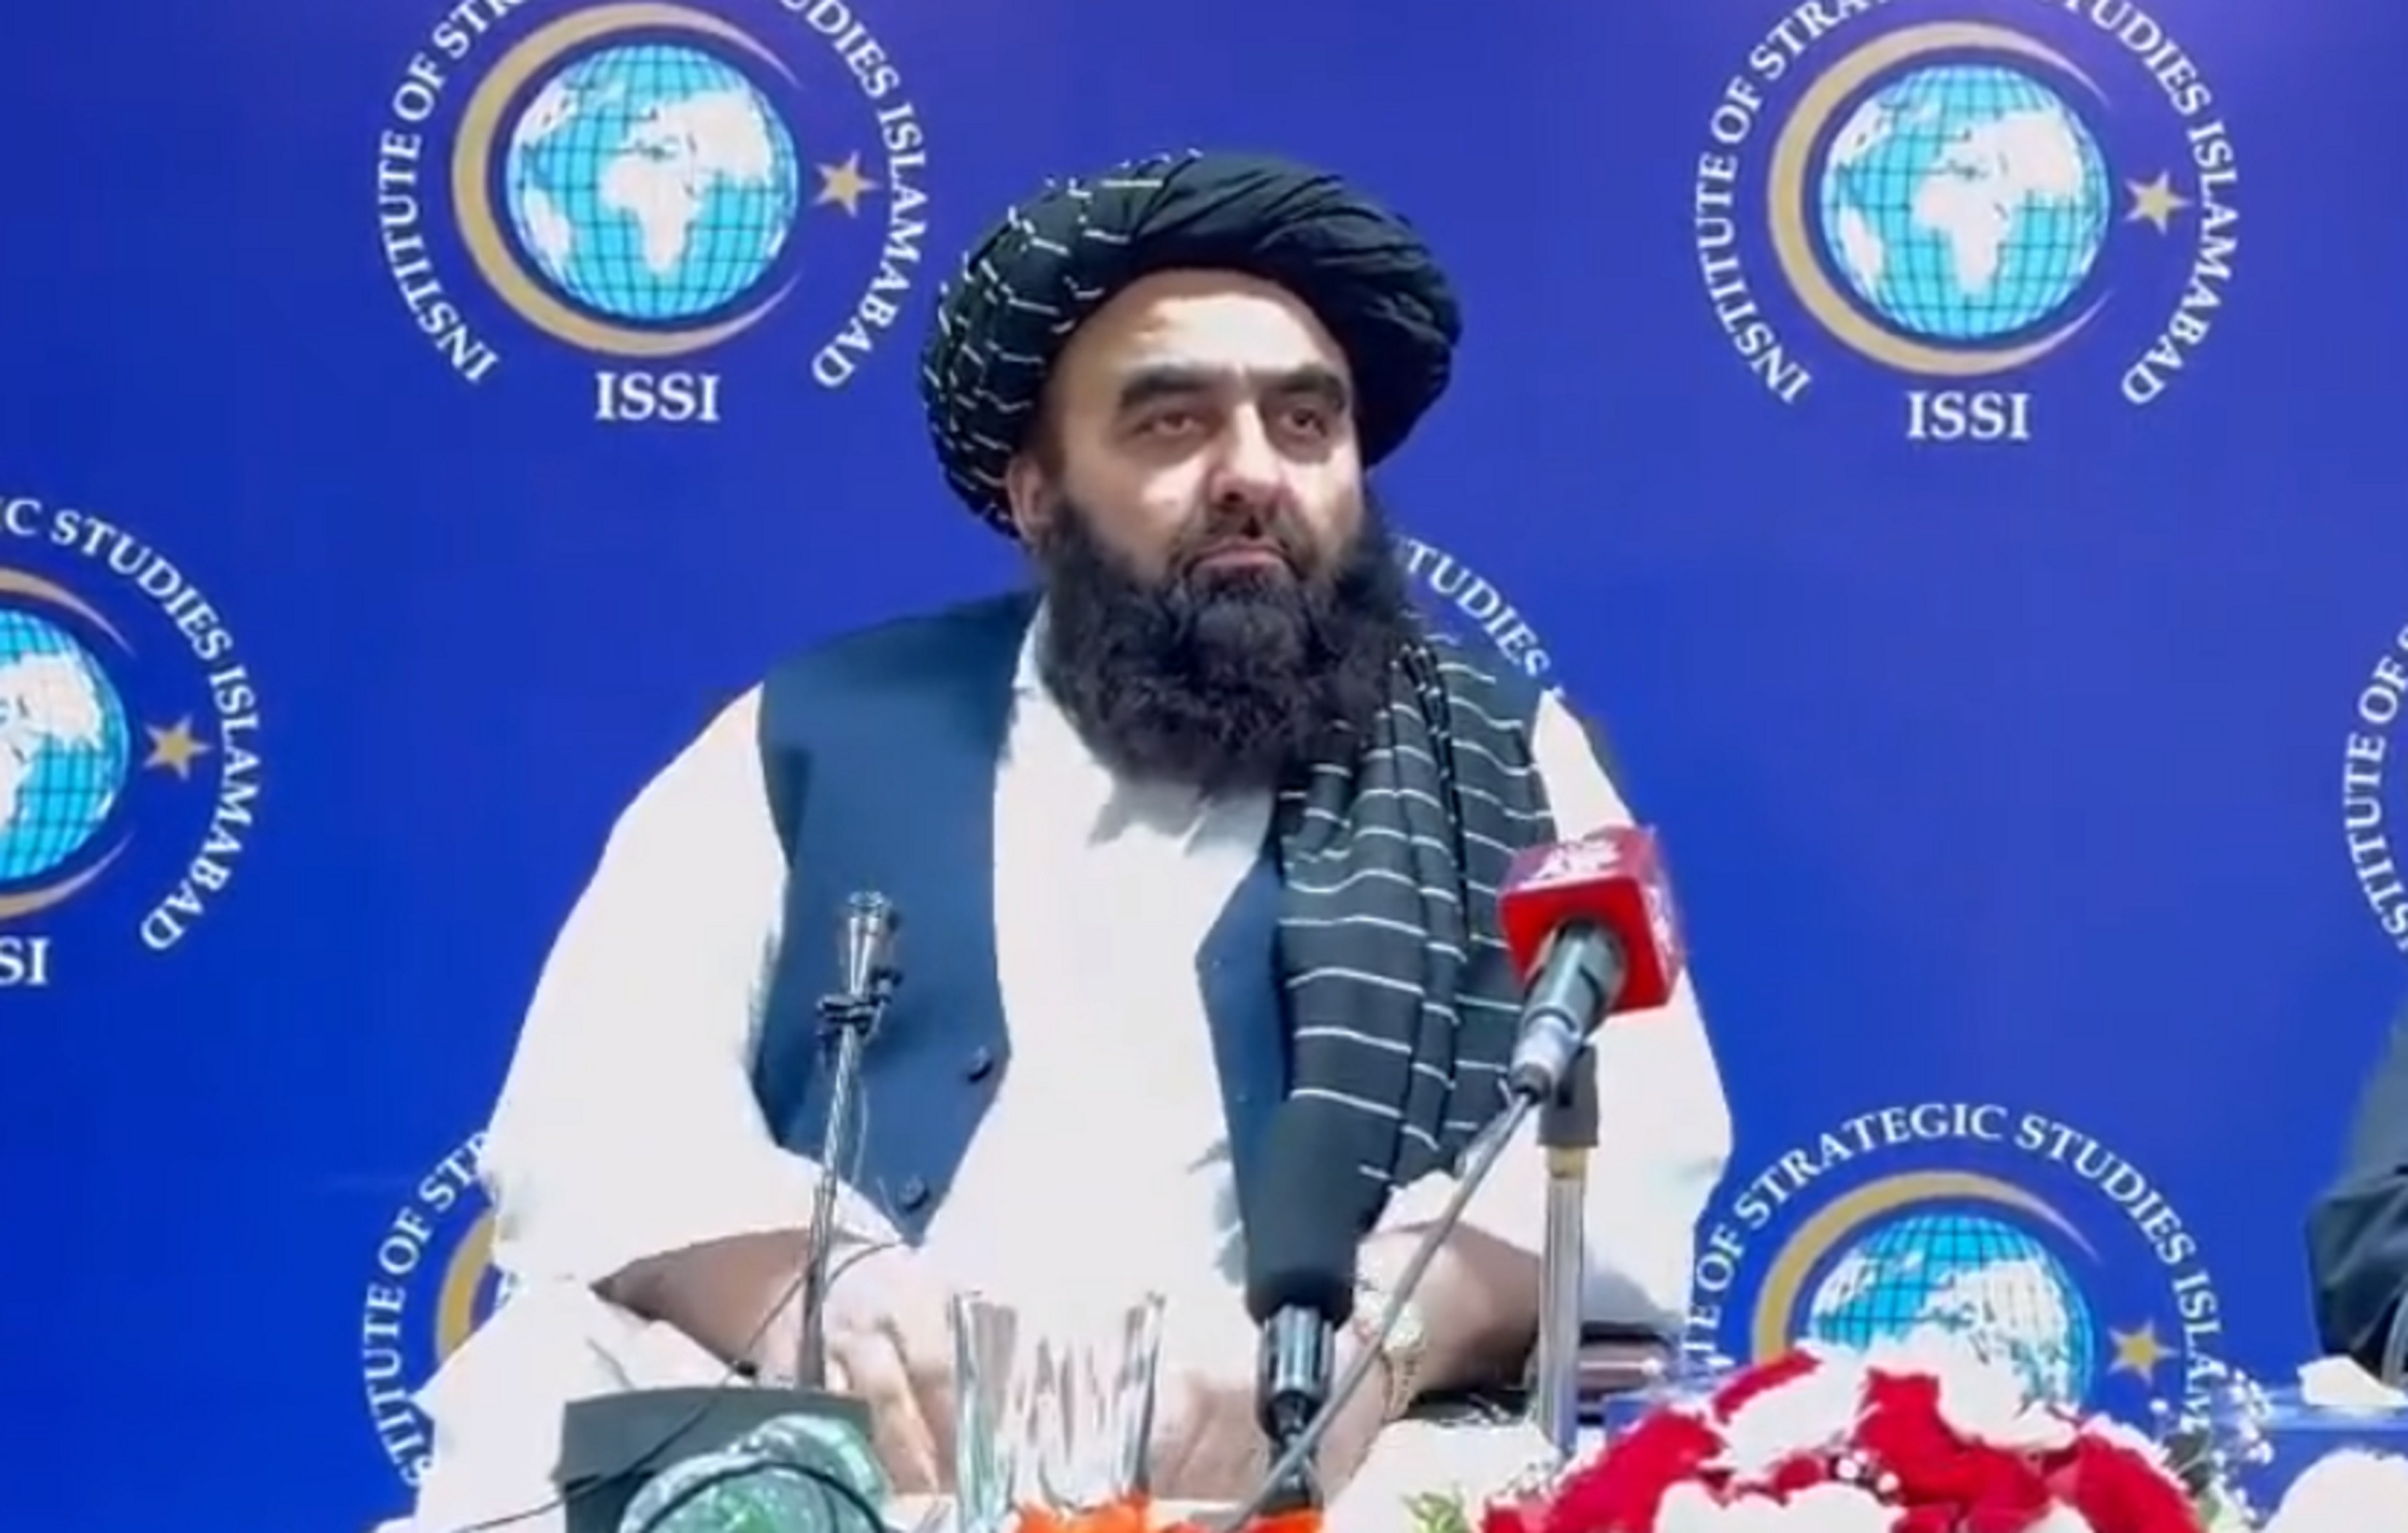 acting afghan foreign minister amir khan muttaqi speaks at the institute of strategic studies in islamabad photo screengrab